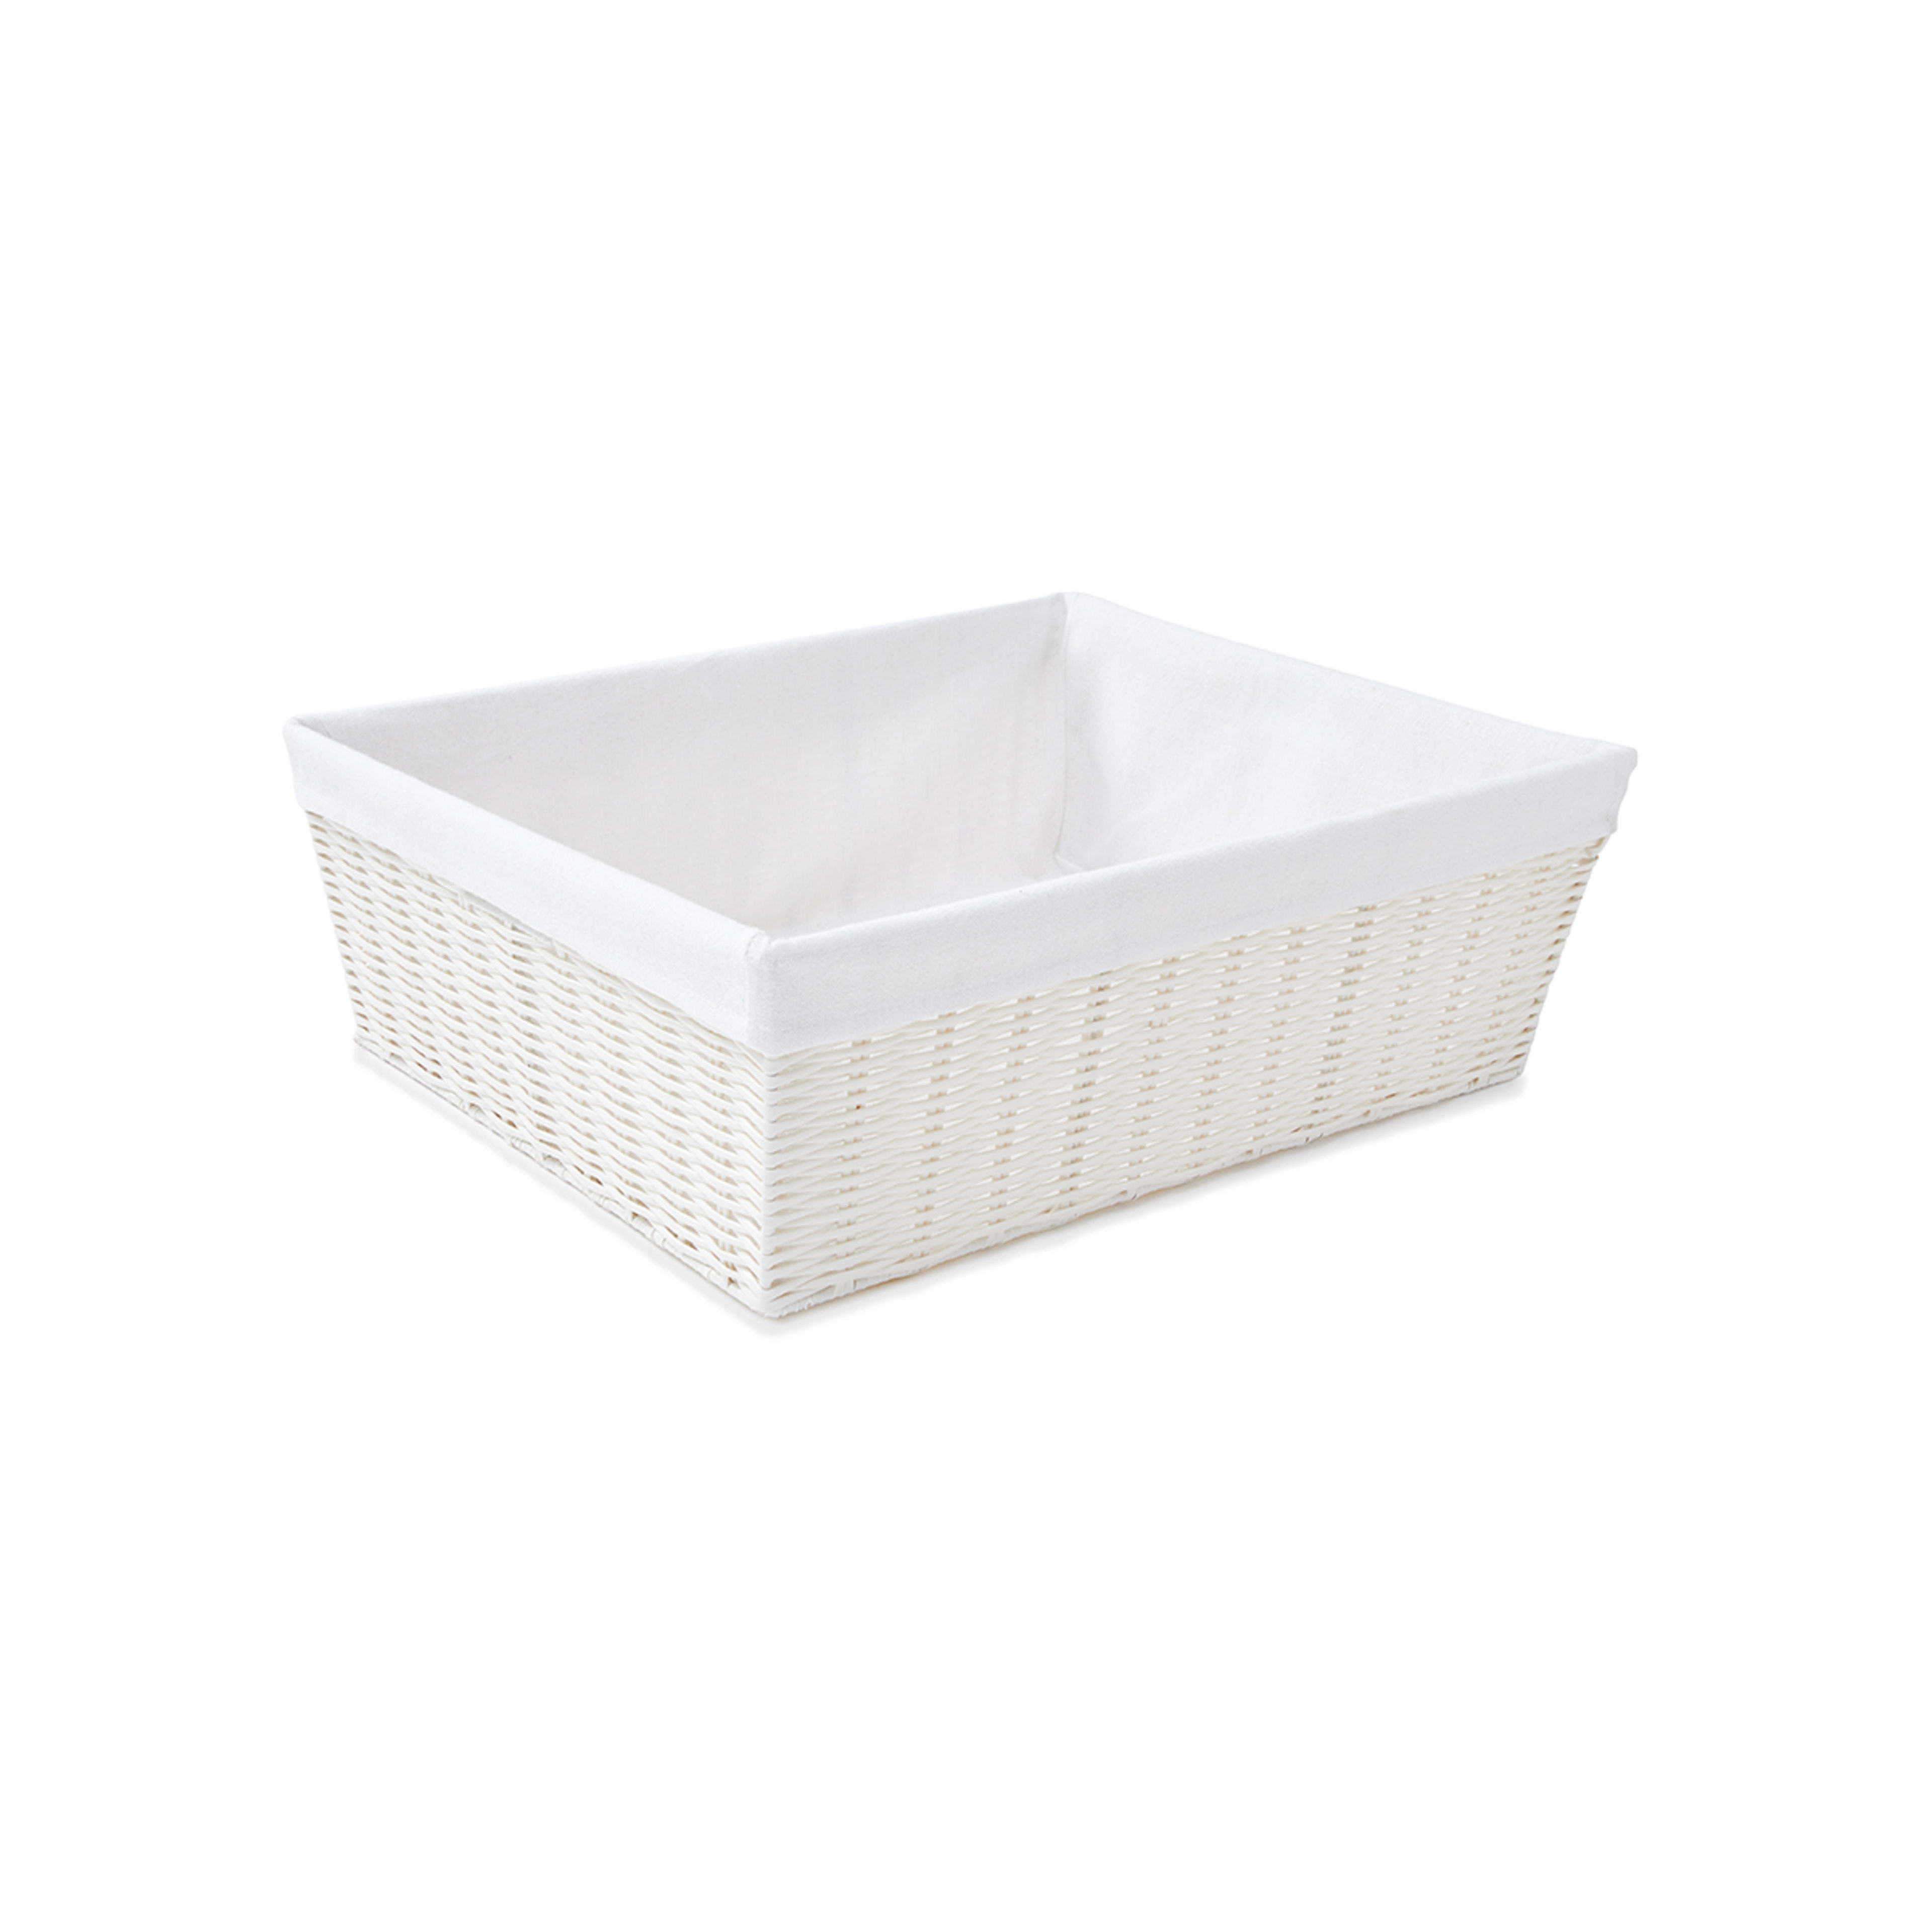 Rattan Look Basket with Liner - White - Kmart